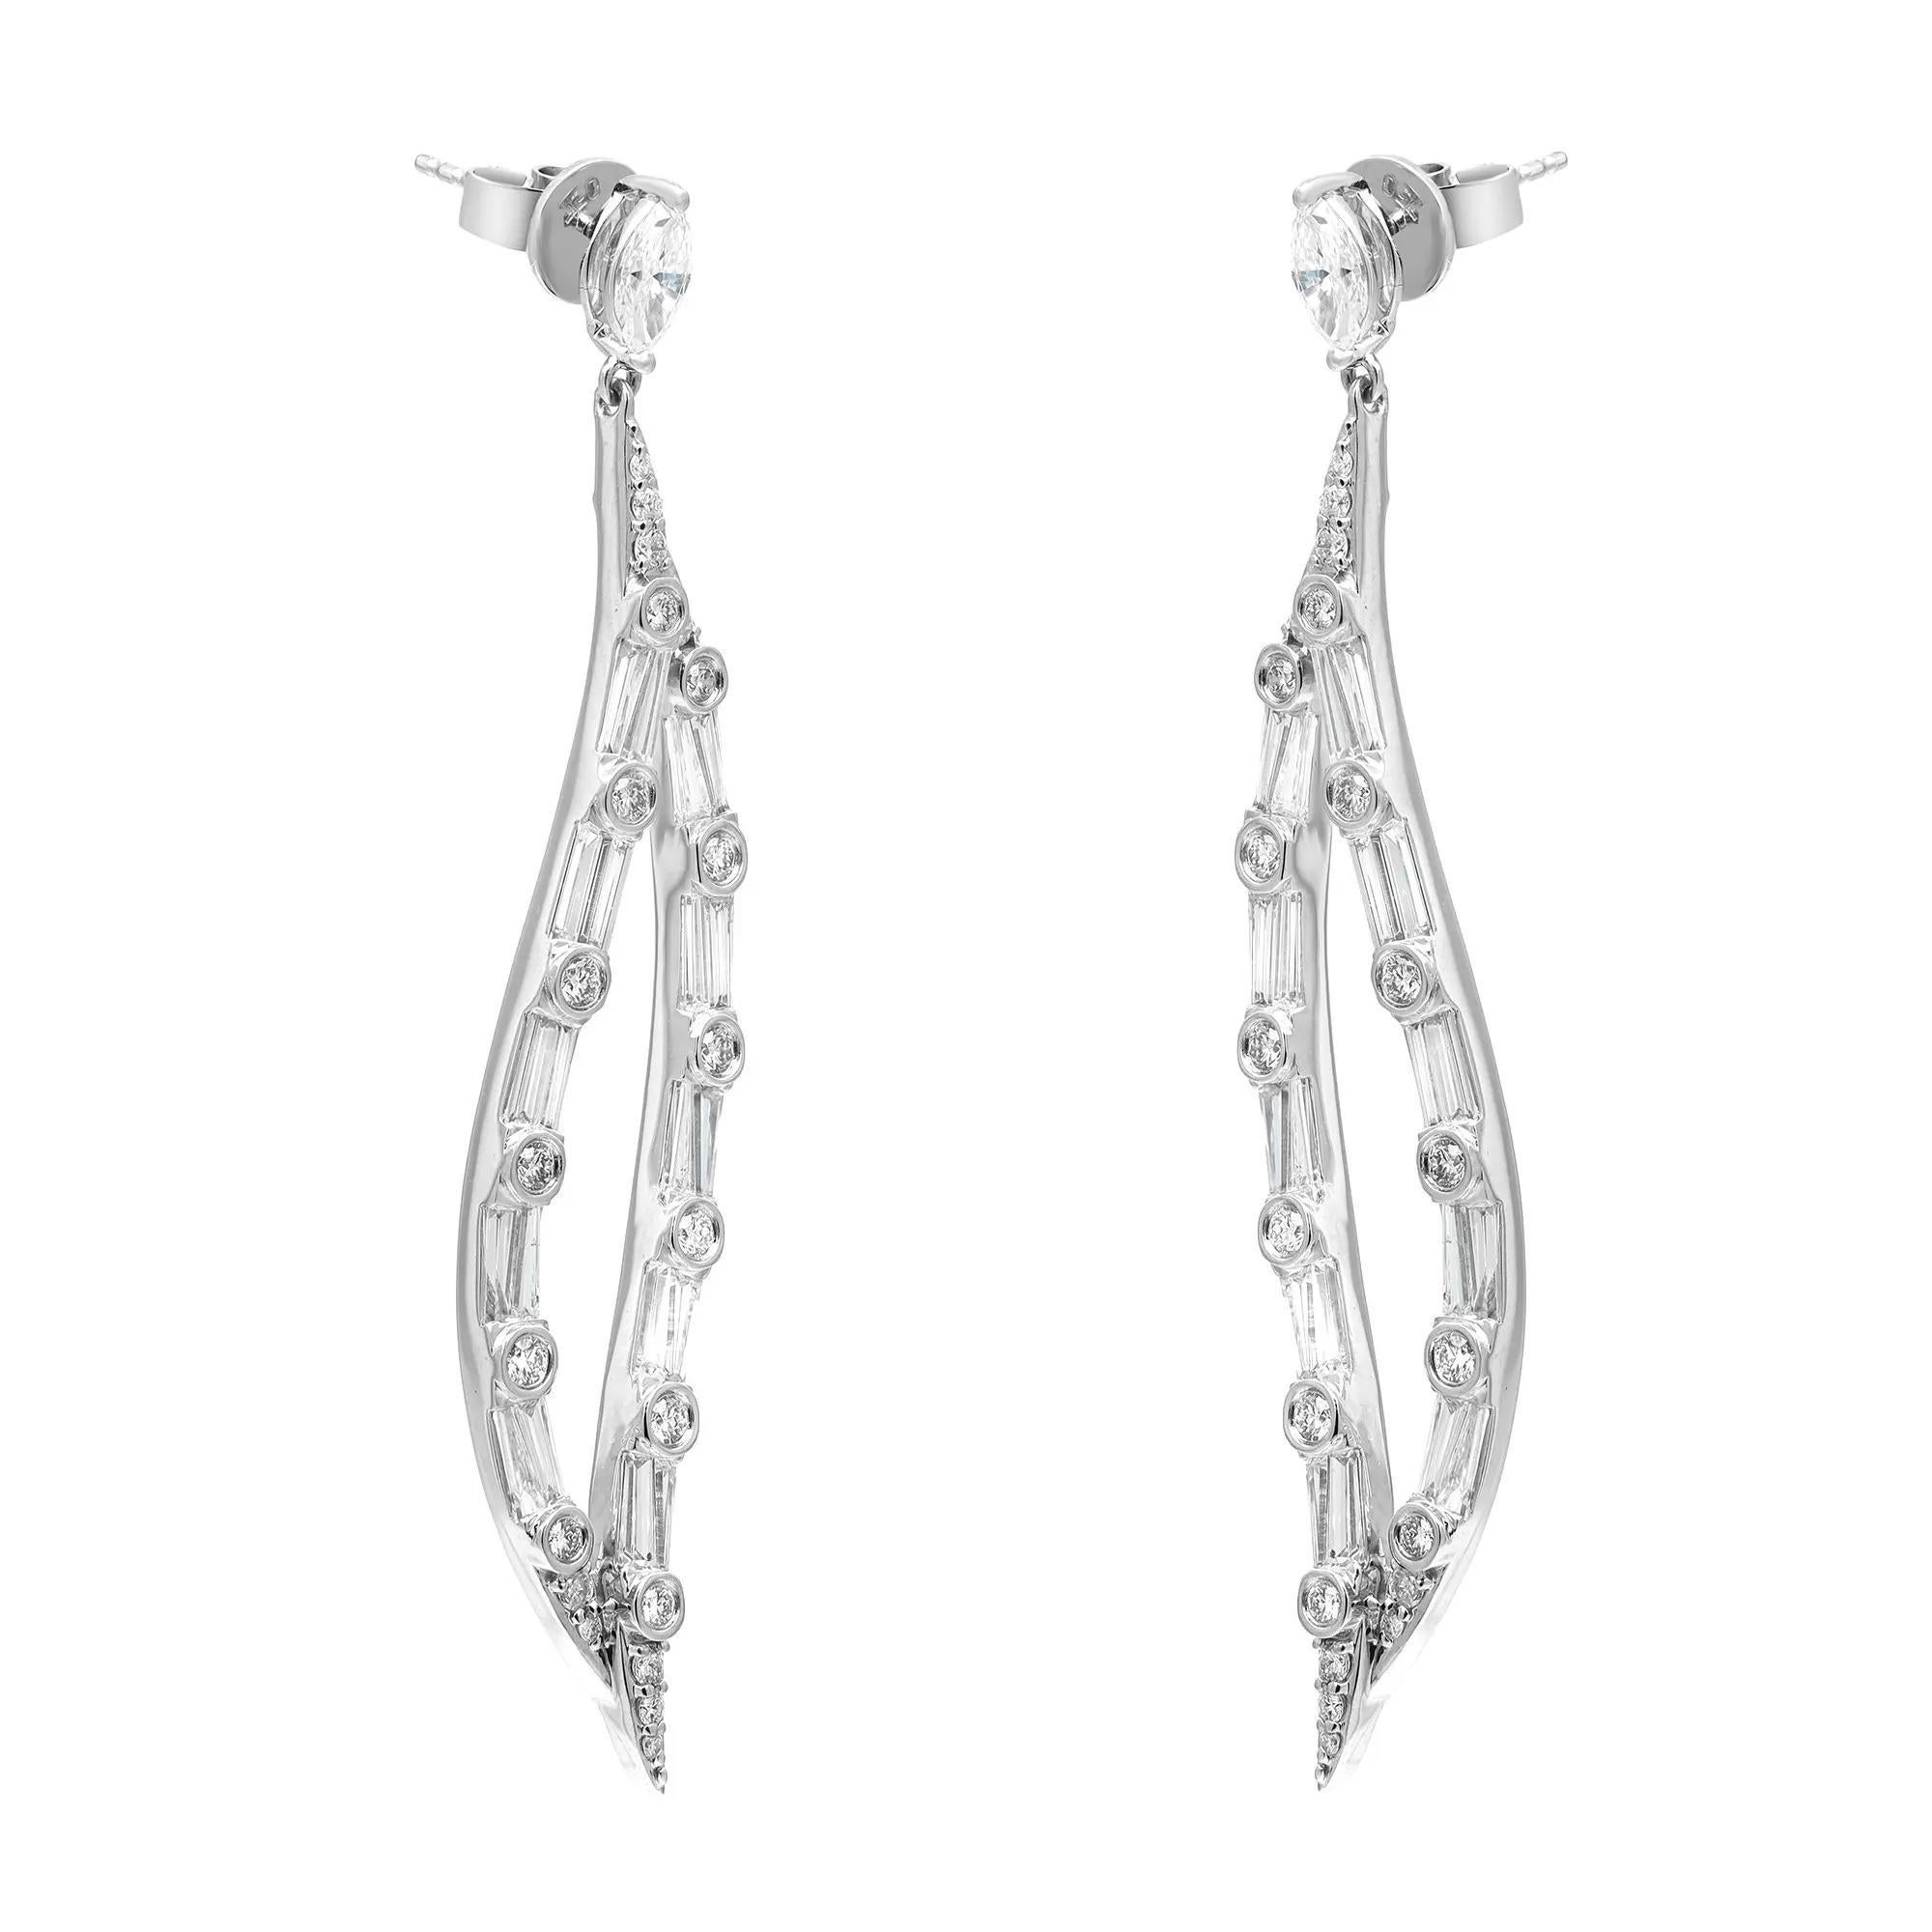 Elevate your style with these enchanting 3.41 Carat Marquise Baguette and Round Cut Diamond Drop Earrings. Impeccably crafted in 18K White Gold, their leaf-shaped design exudes nature-inspired grace. The 3.41 carats of marquise, baguette, and